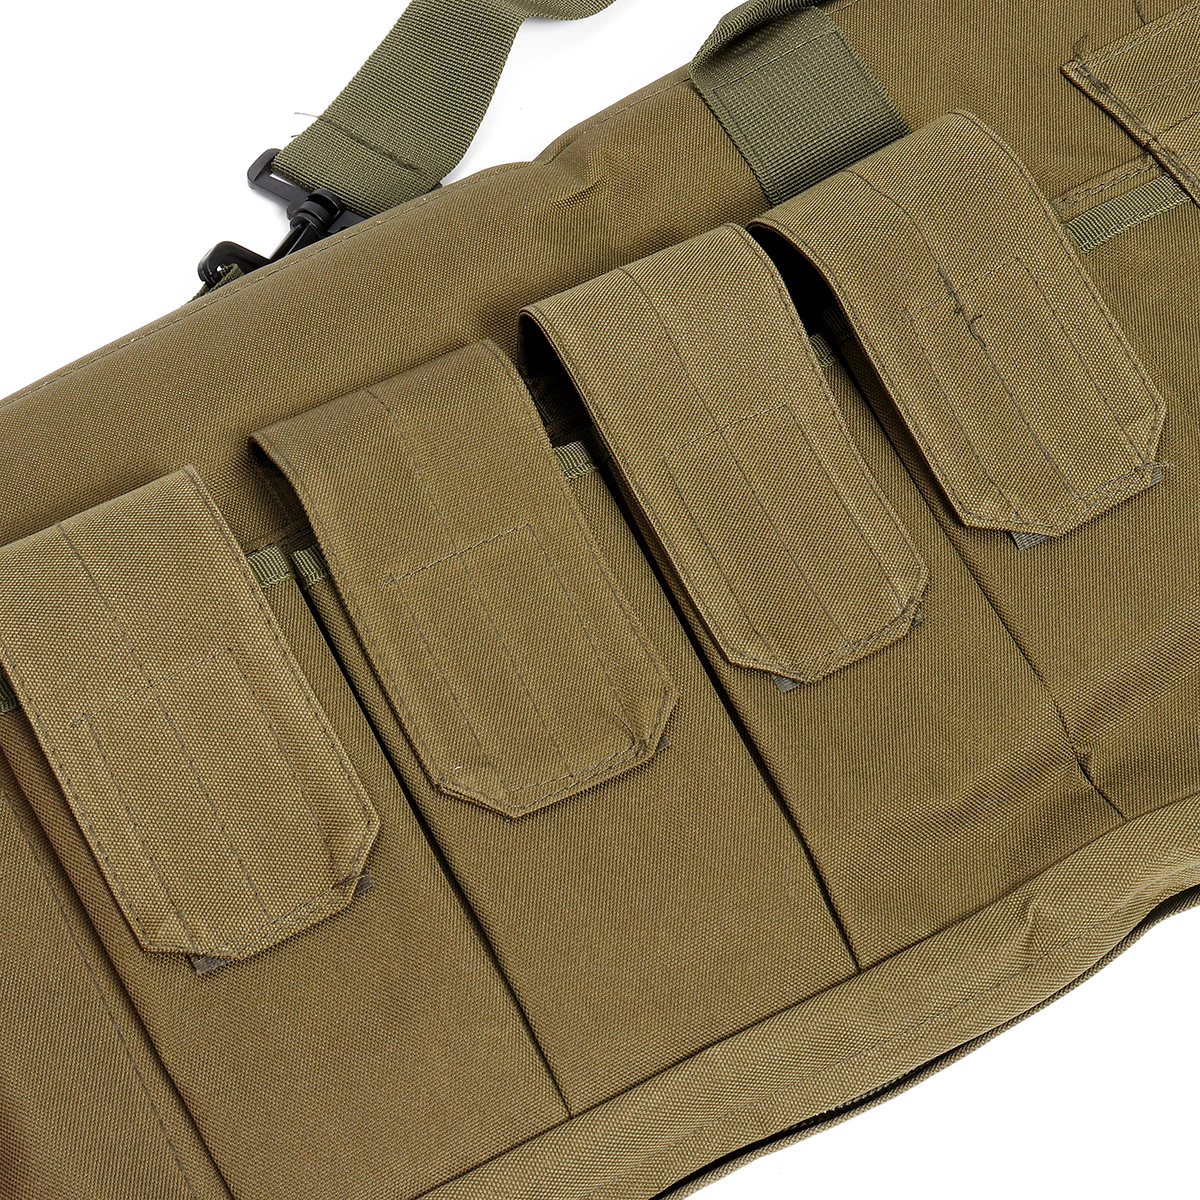 120x30x5cm-Outdoor-Tactical-Bag-CS-Airsoft-Protection-Case-Tactical-Package-Heavy-Duty-Hunting-Acces-1522810-6